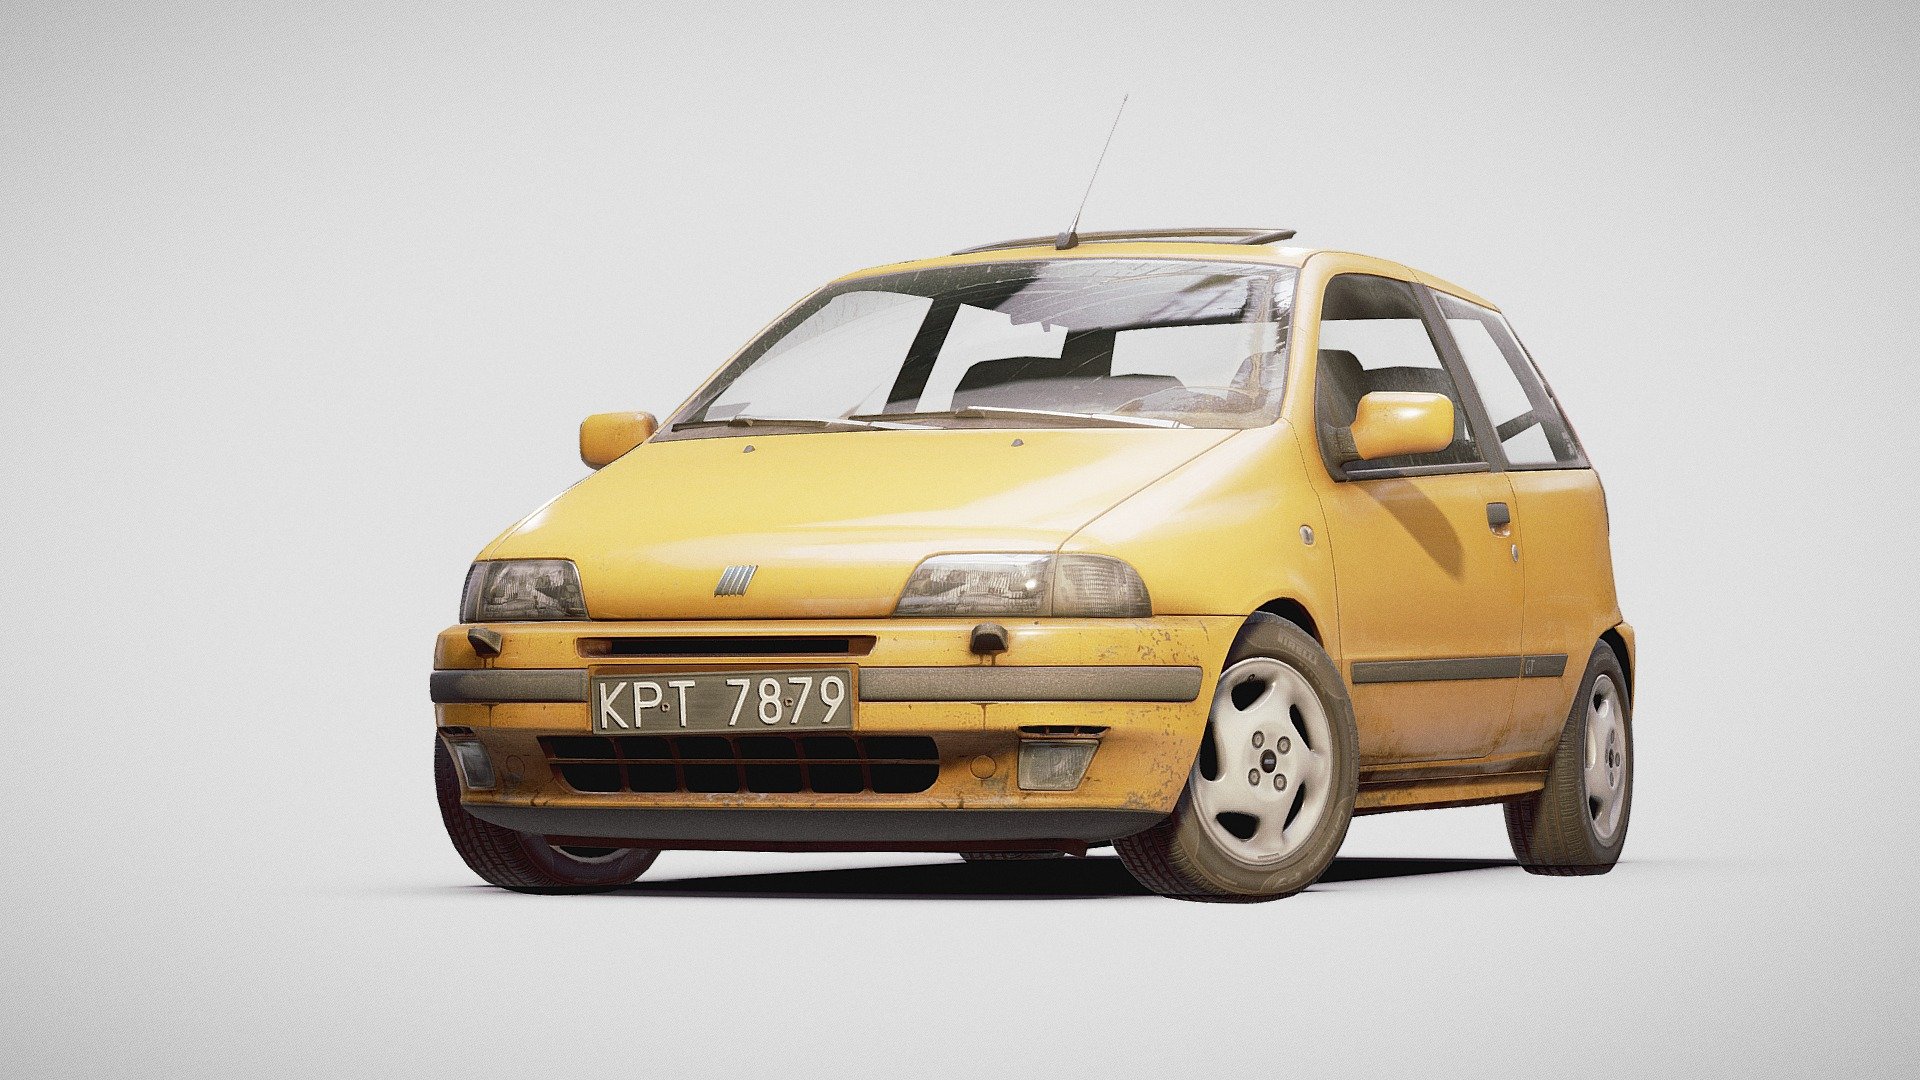 NOW for free for use in your projects. Also commercial. Ideally give some credit and let me know, but it's not obligatory. Have fun!

1995 FIAT Punto GT

Modelled in 2014 in Blender, textured in Photoshop 3d model